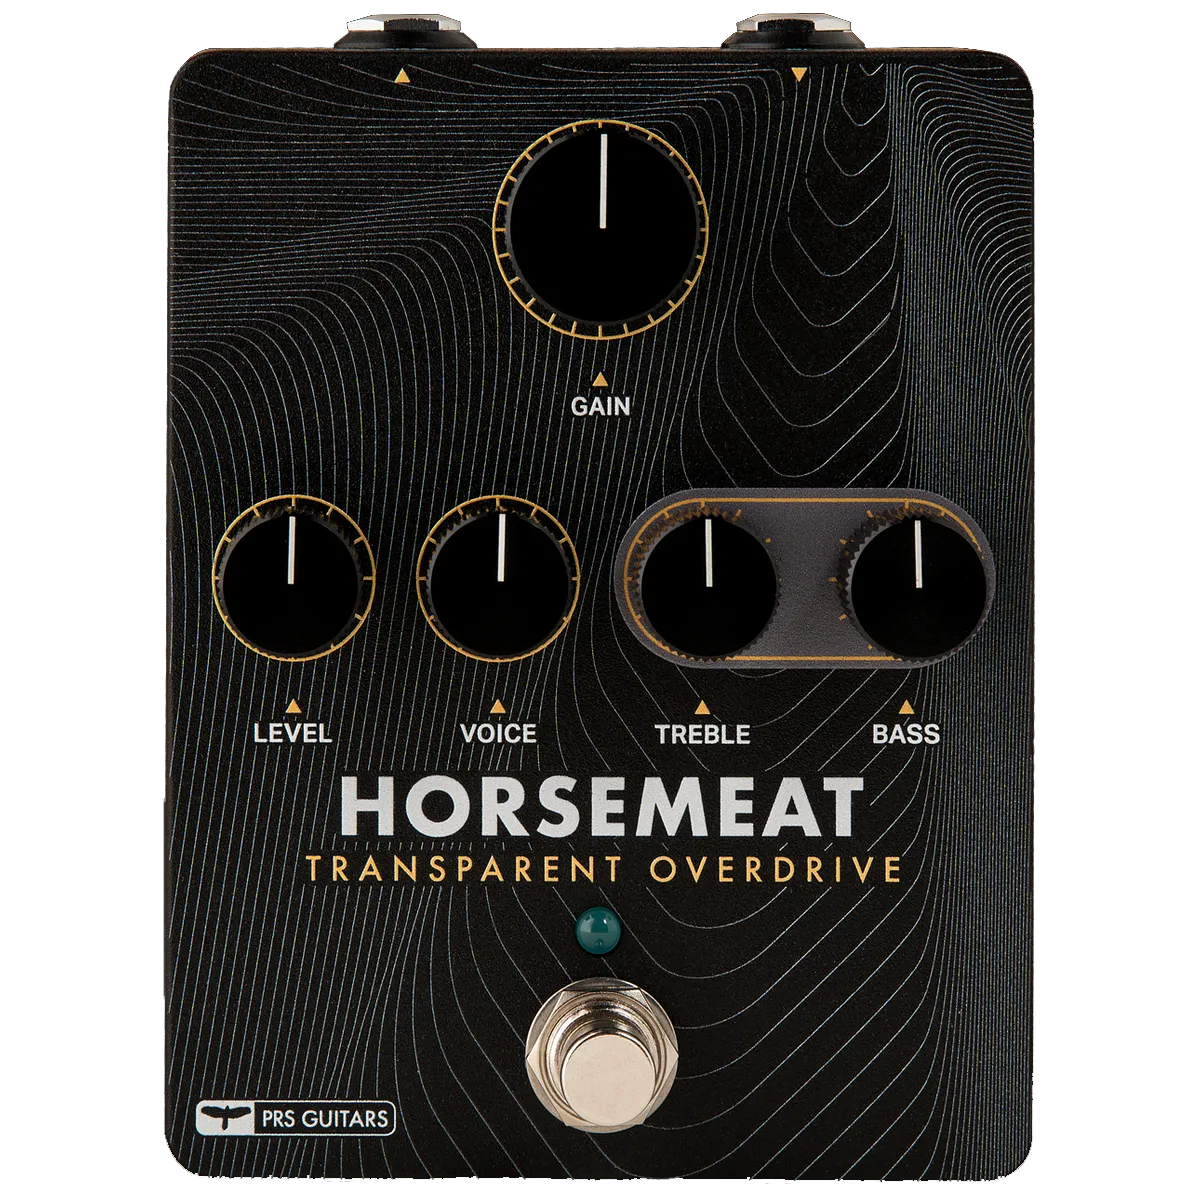 Top down of PRS Horsemeat Transparent Overdrive.